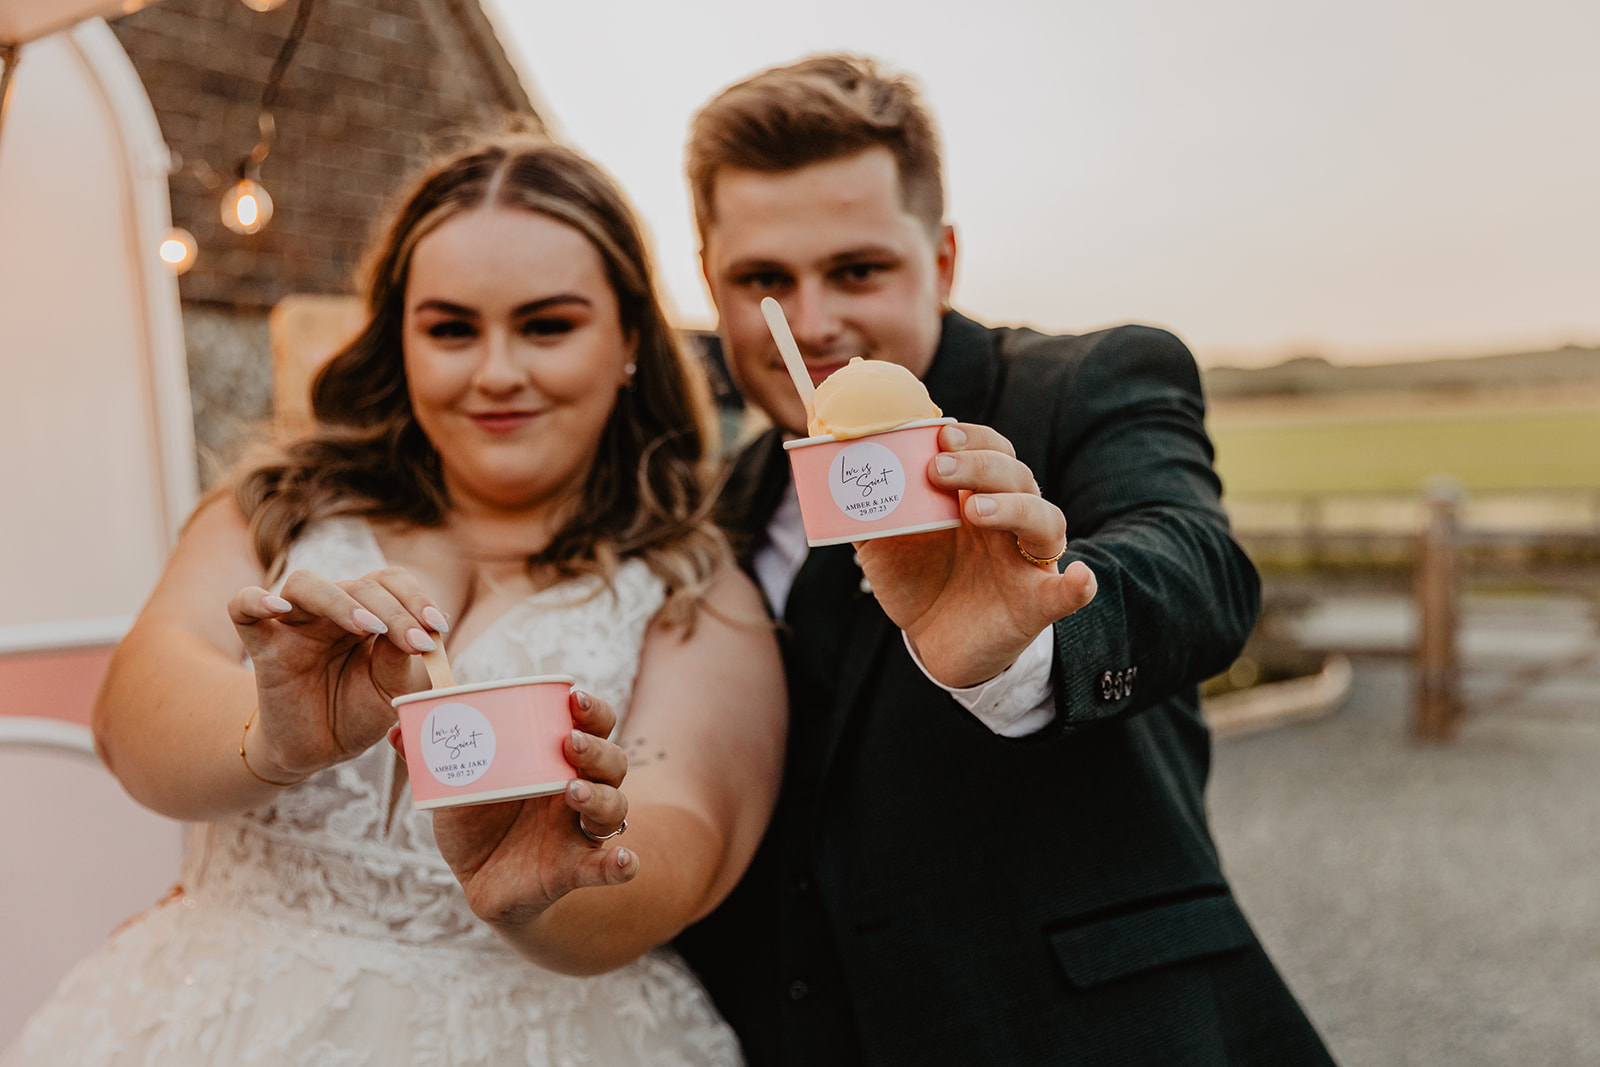 Bride and Groom eat ice cream at a Long Furlong Barn Wedding in Worthing, Sussex. By Olive Joy Photography.